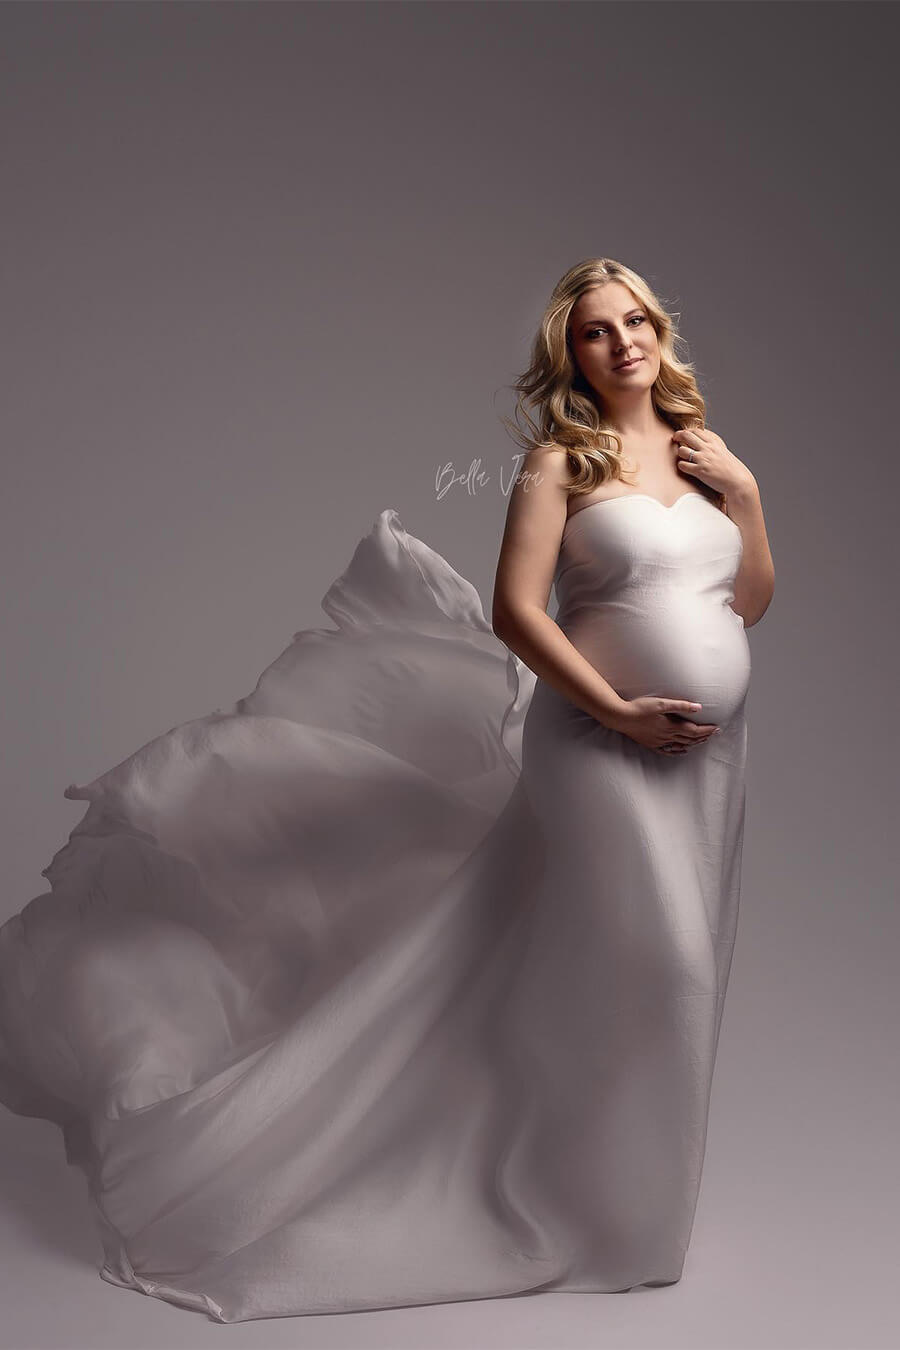 blond pregnant model poses in a studio wearing a off white silky scarf to cover her body.